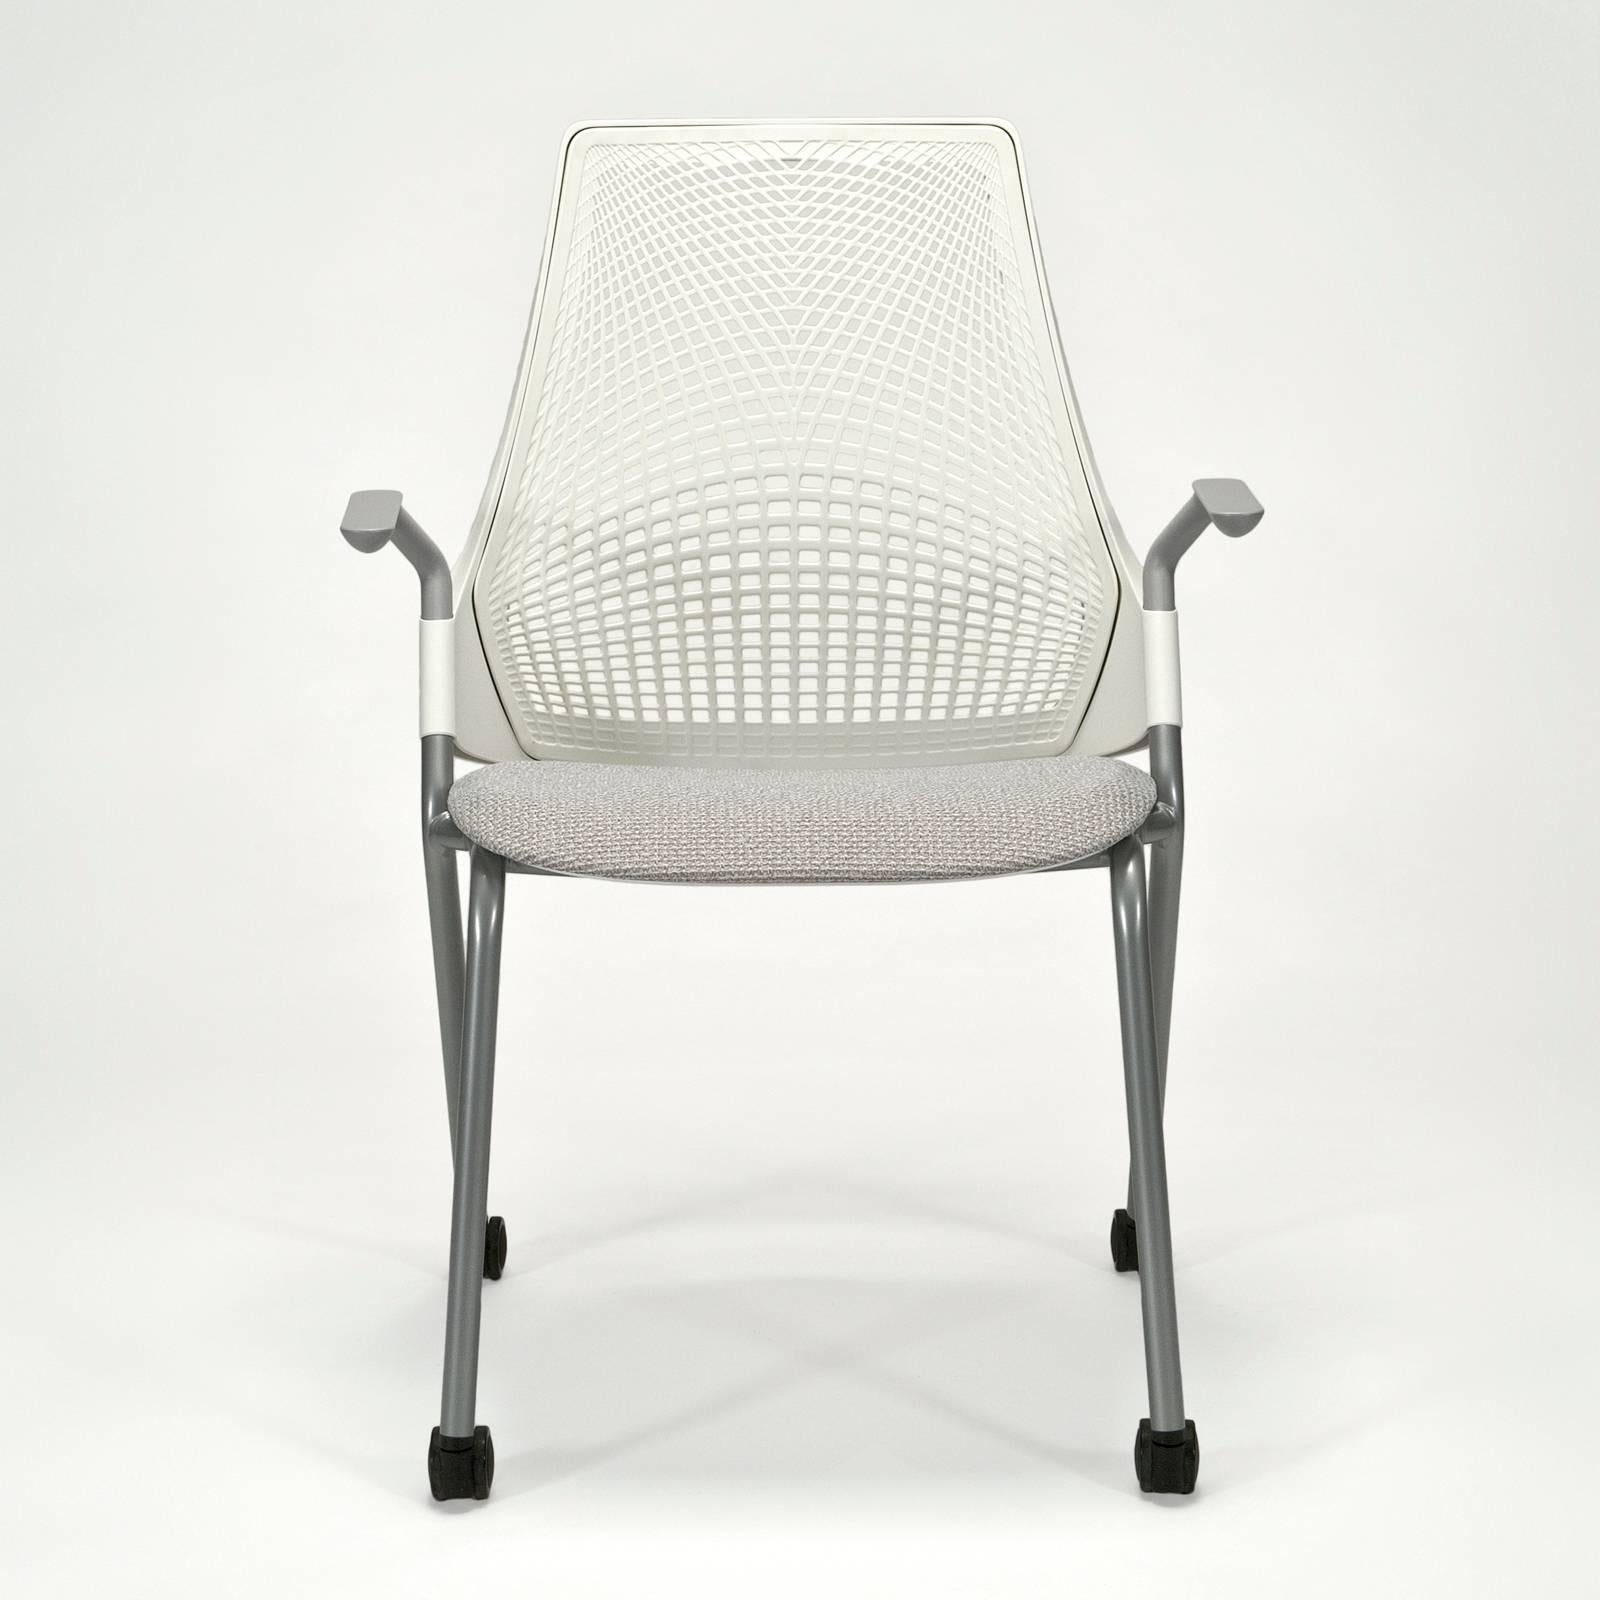 Six available -Brand new with original protective wrapping and consumer labels still attached. All chairs come with tilt lifter allowing adjustment to both tilt tension and range (four settings). These examples in studio white with fog upholstery.